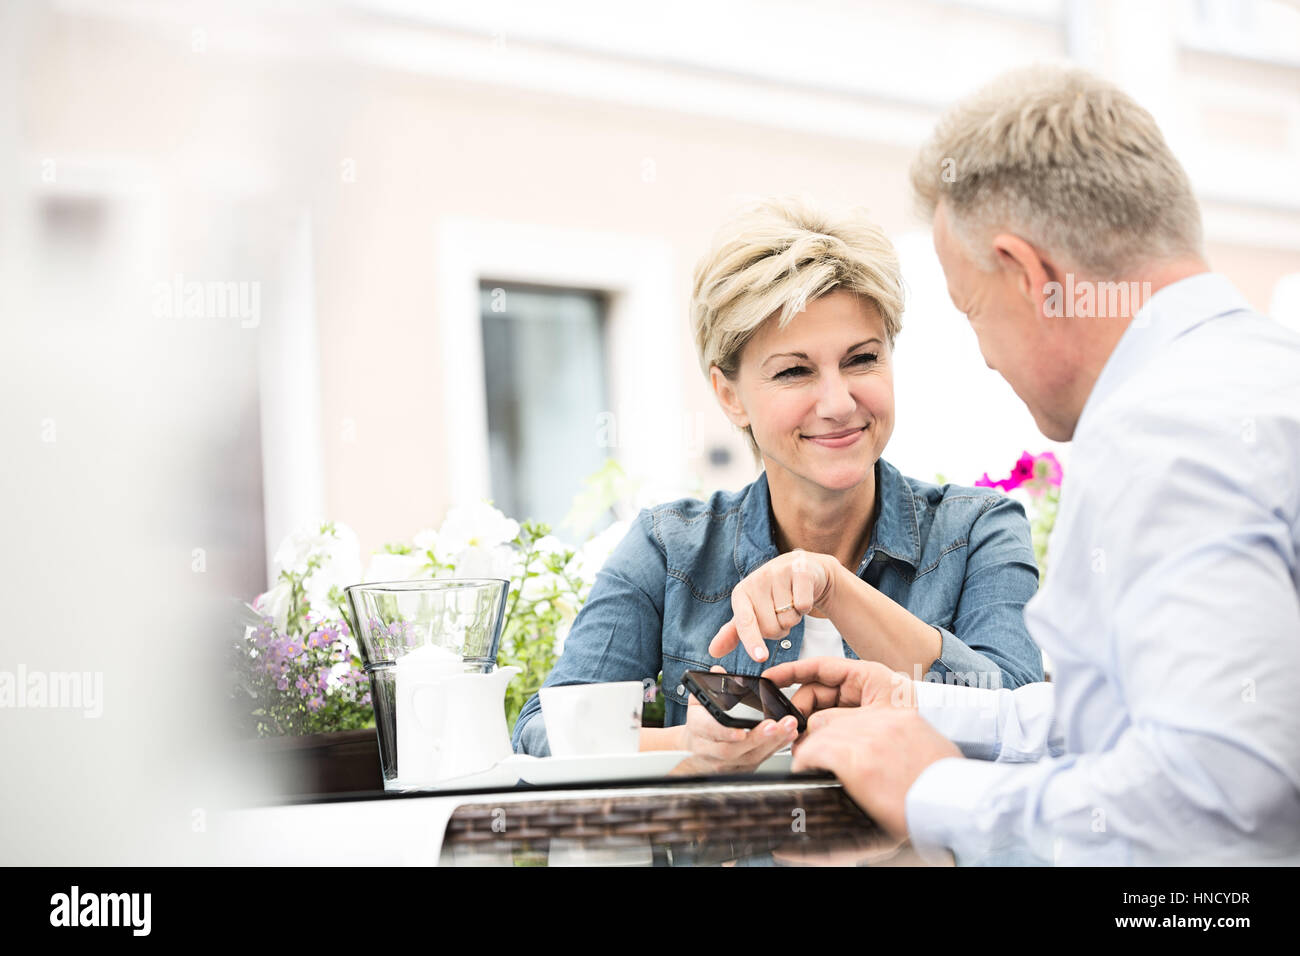 Happy middle-aged woman using cell phone at sidewalk cafe Banque D'Images